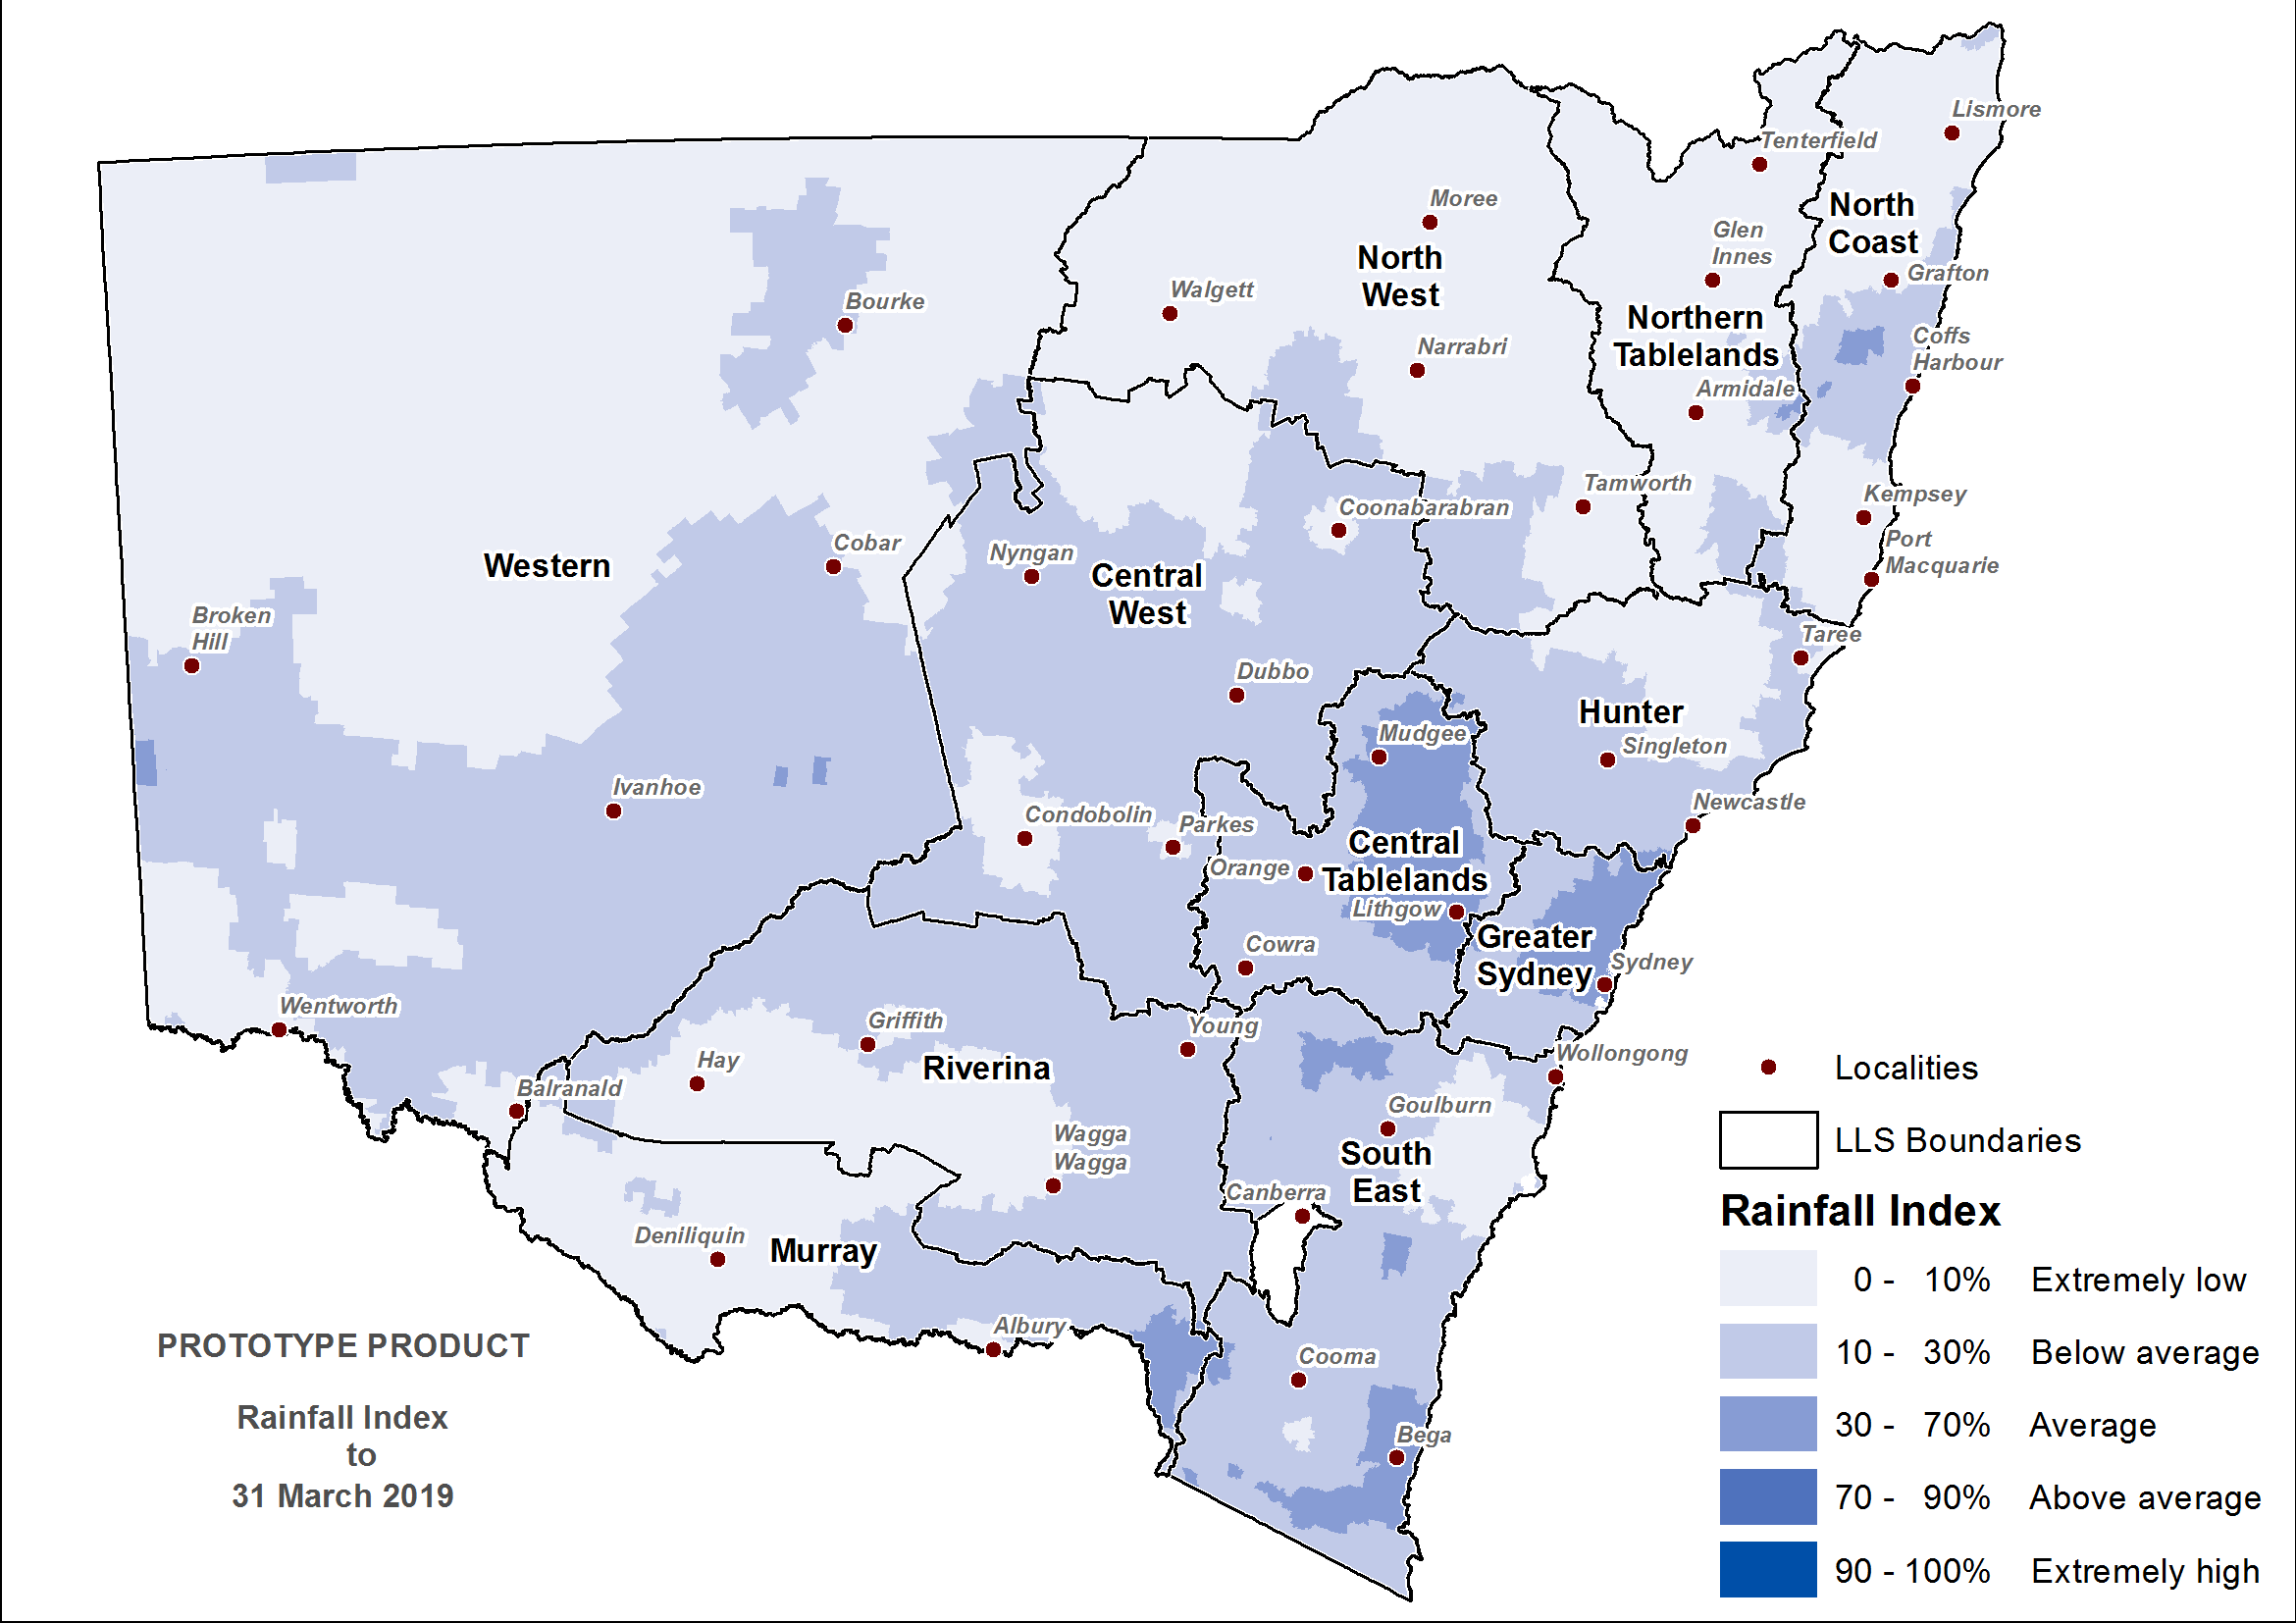 Rainfall Index (RI) to 31 March 2019 - For an accessible explanation of this image contact scott.wallace@dpi.nsw.gov.au